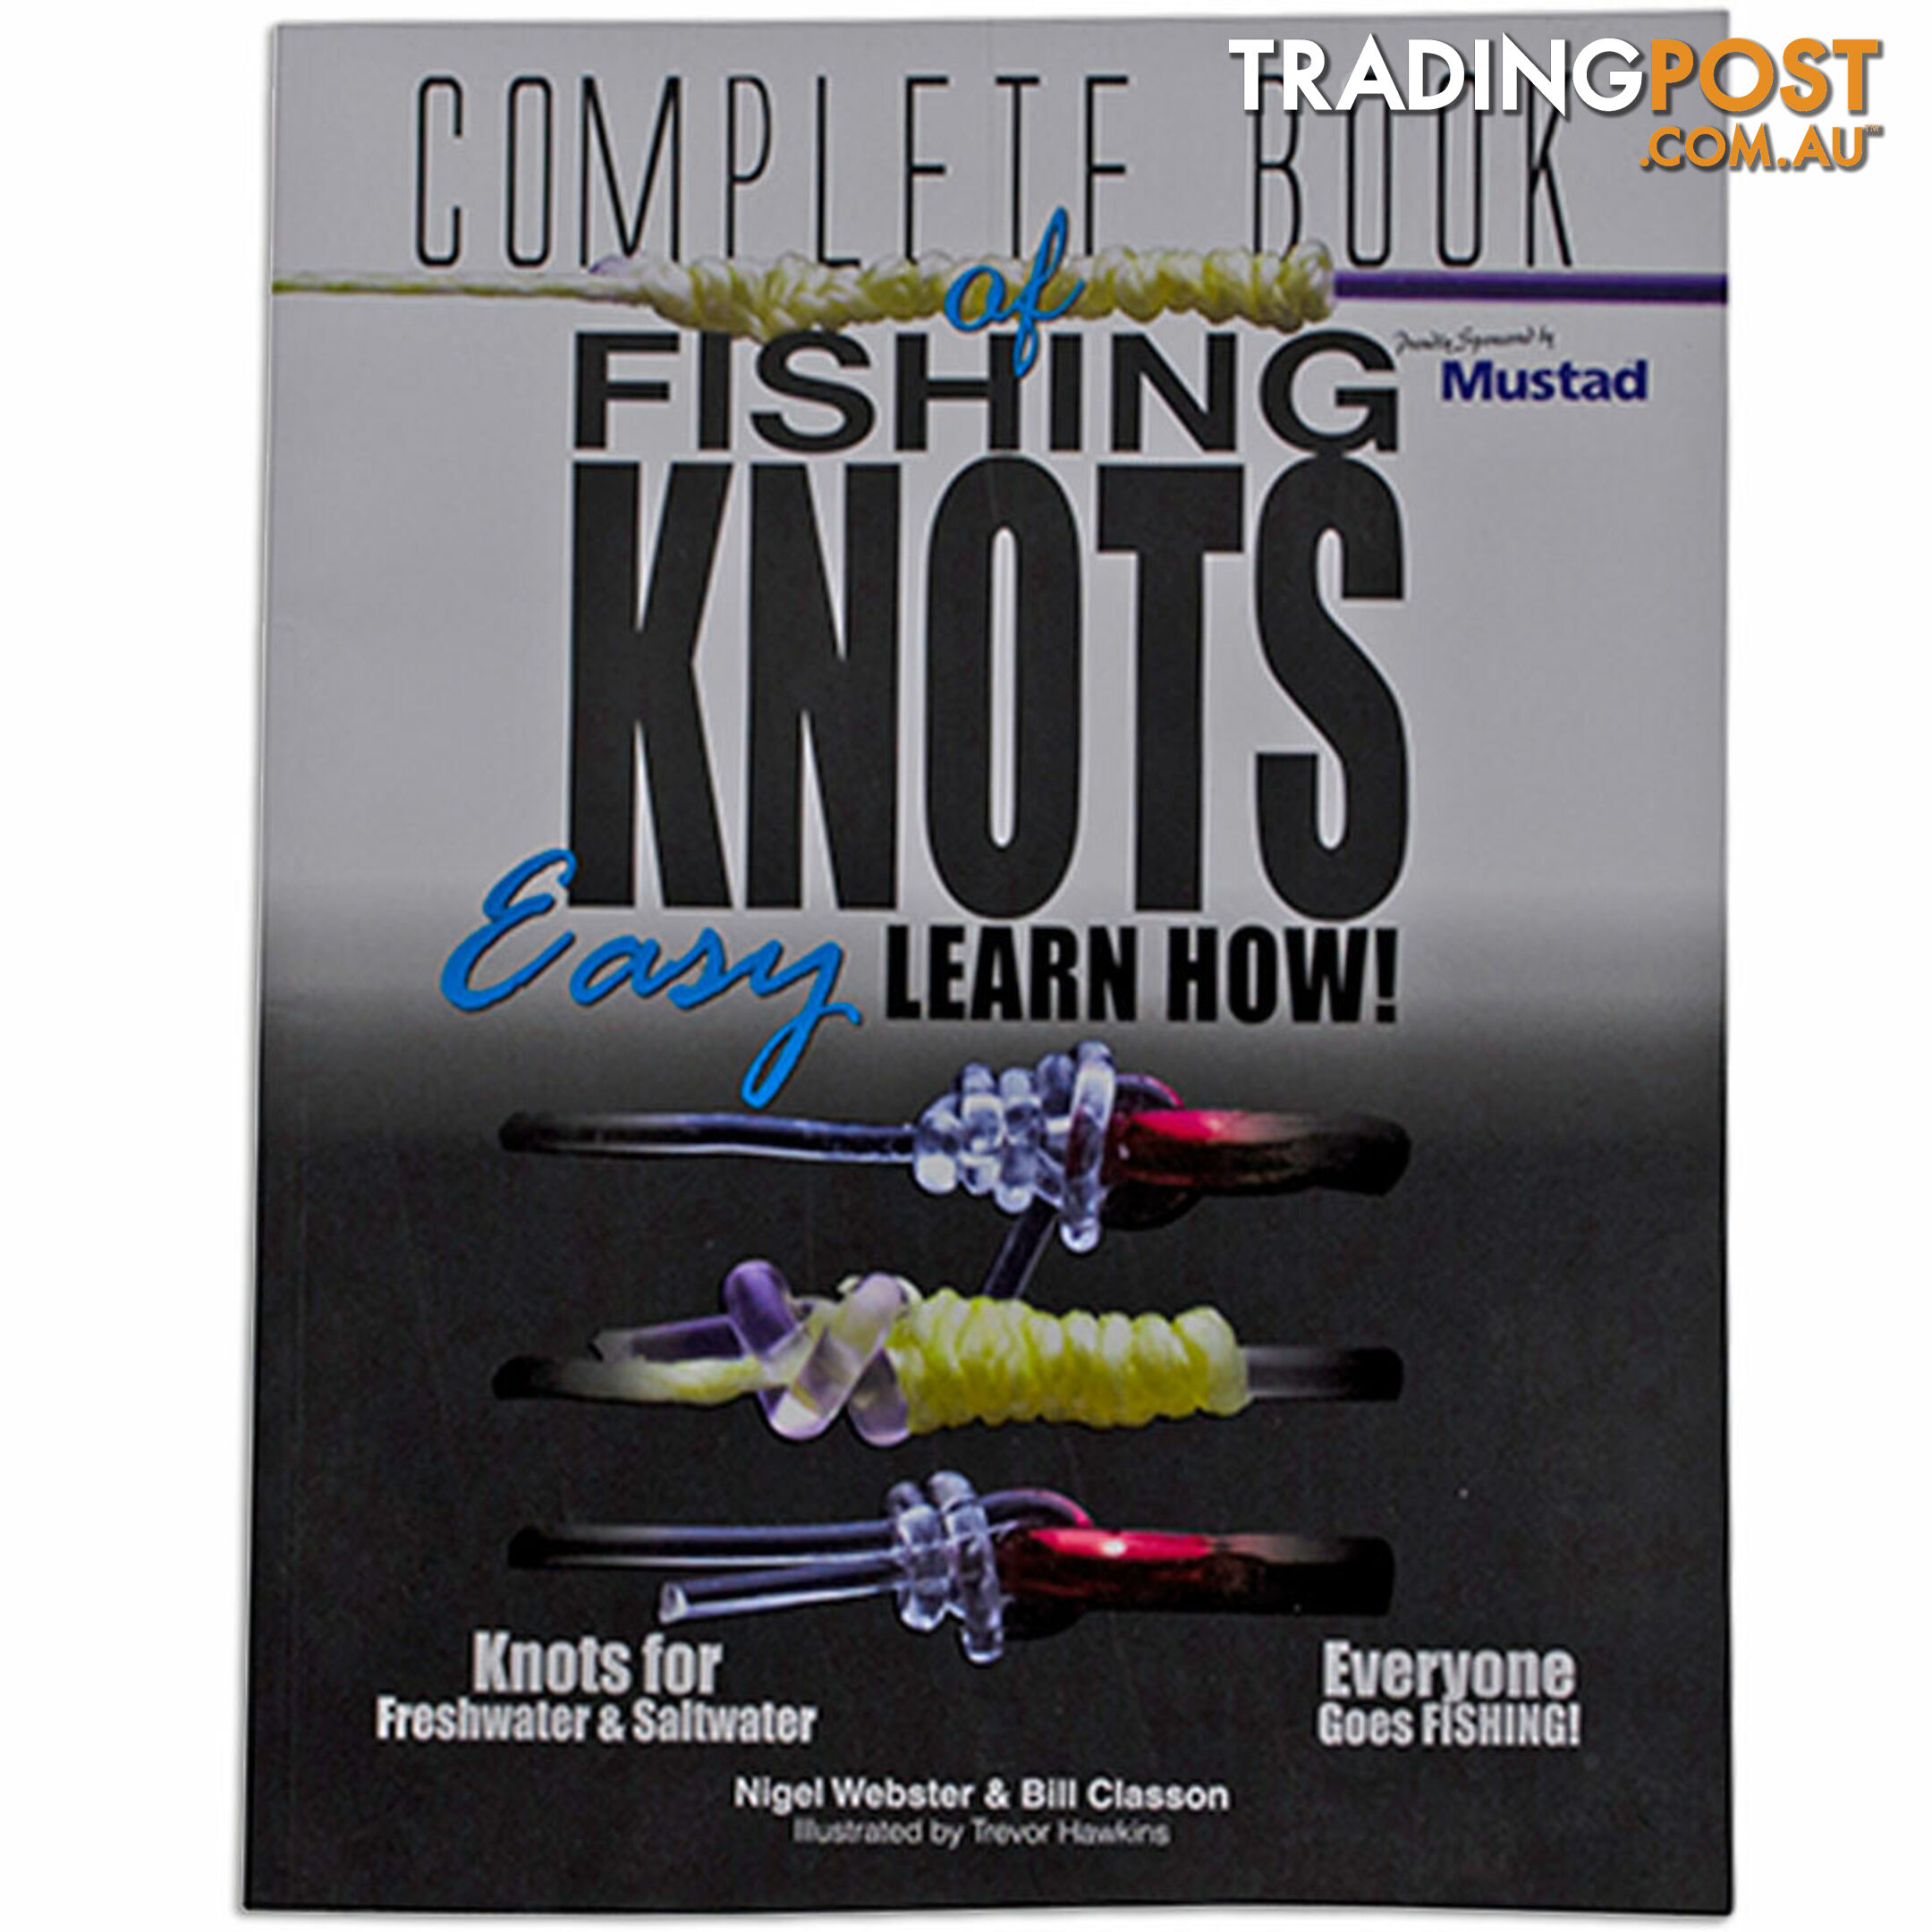 Complete book of fishing knots - B3263 - AFN - 9781865133263